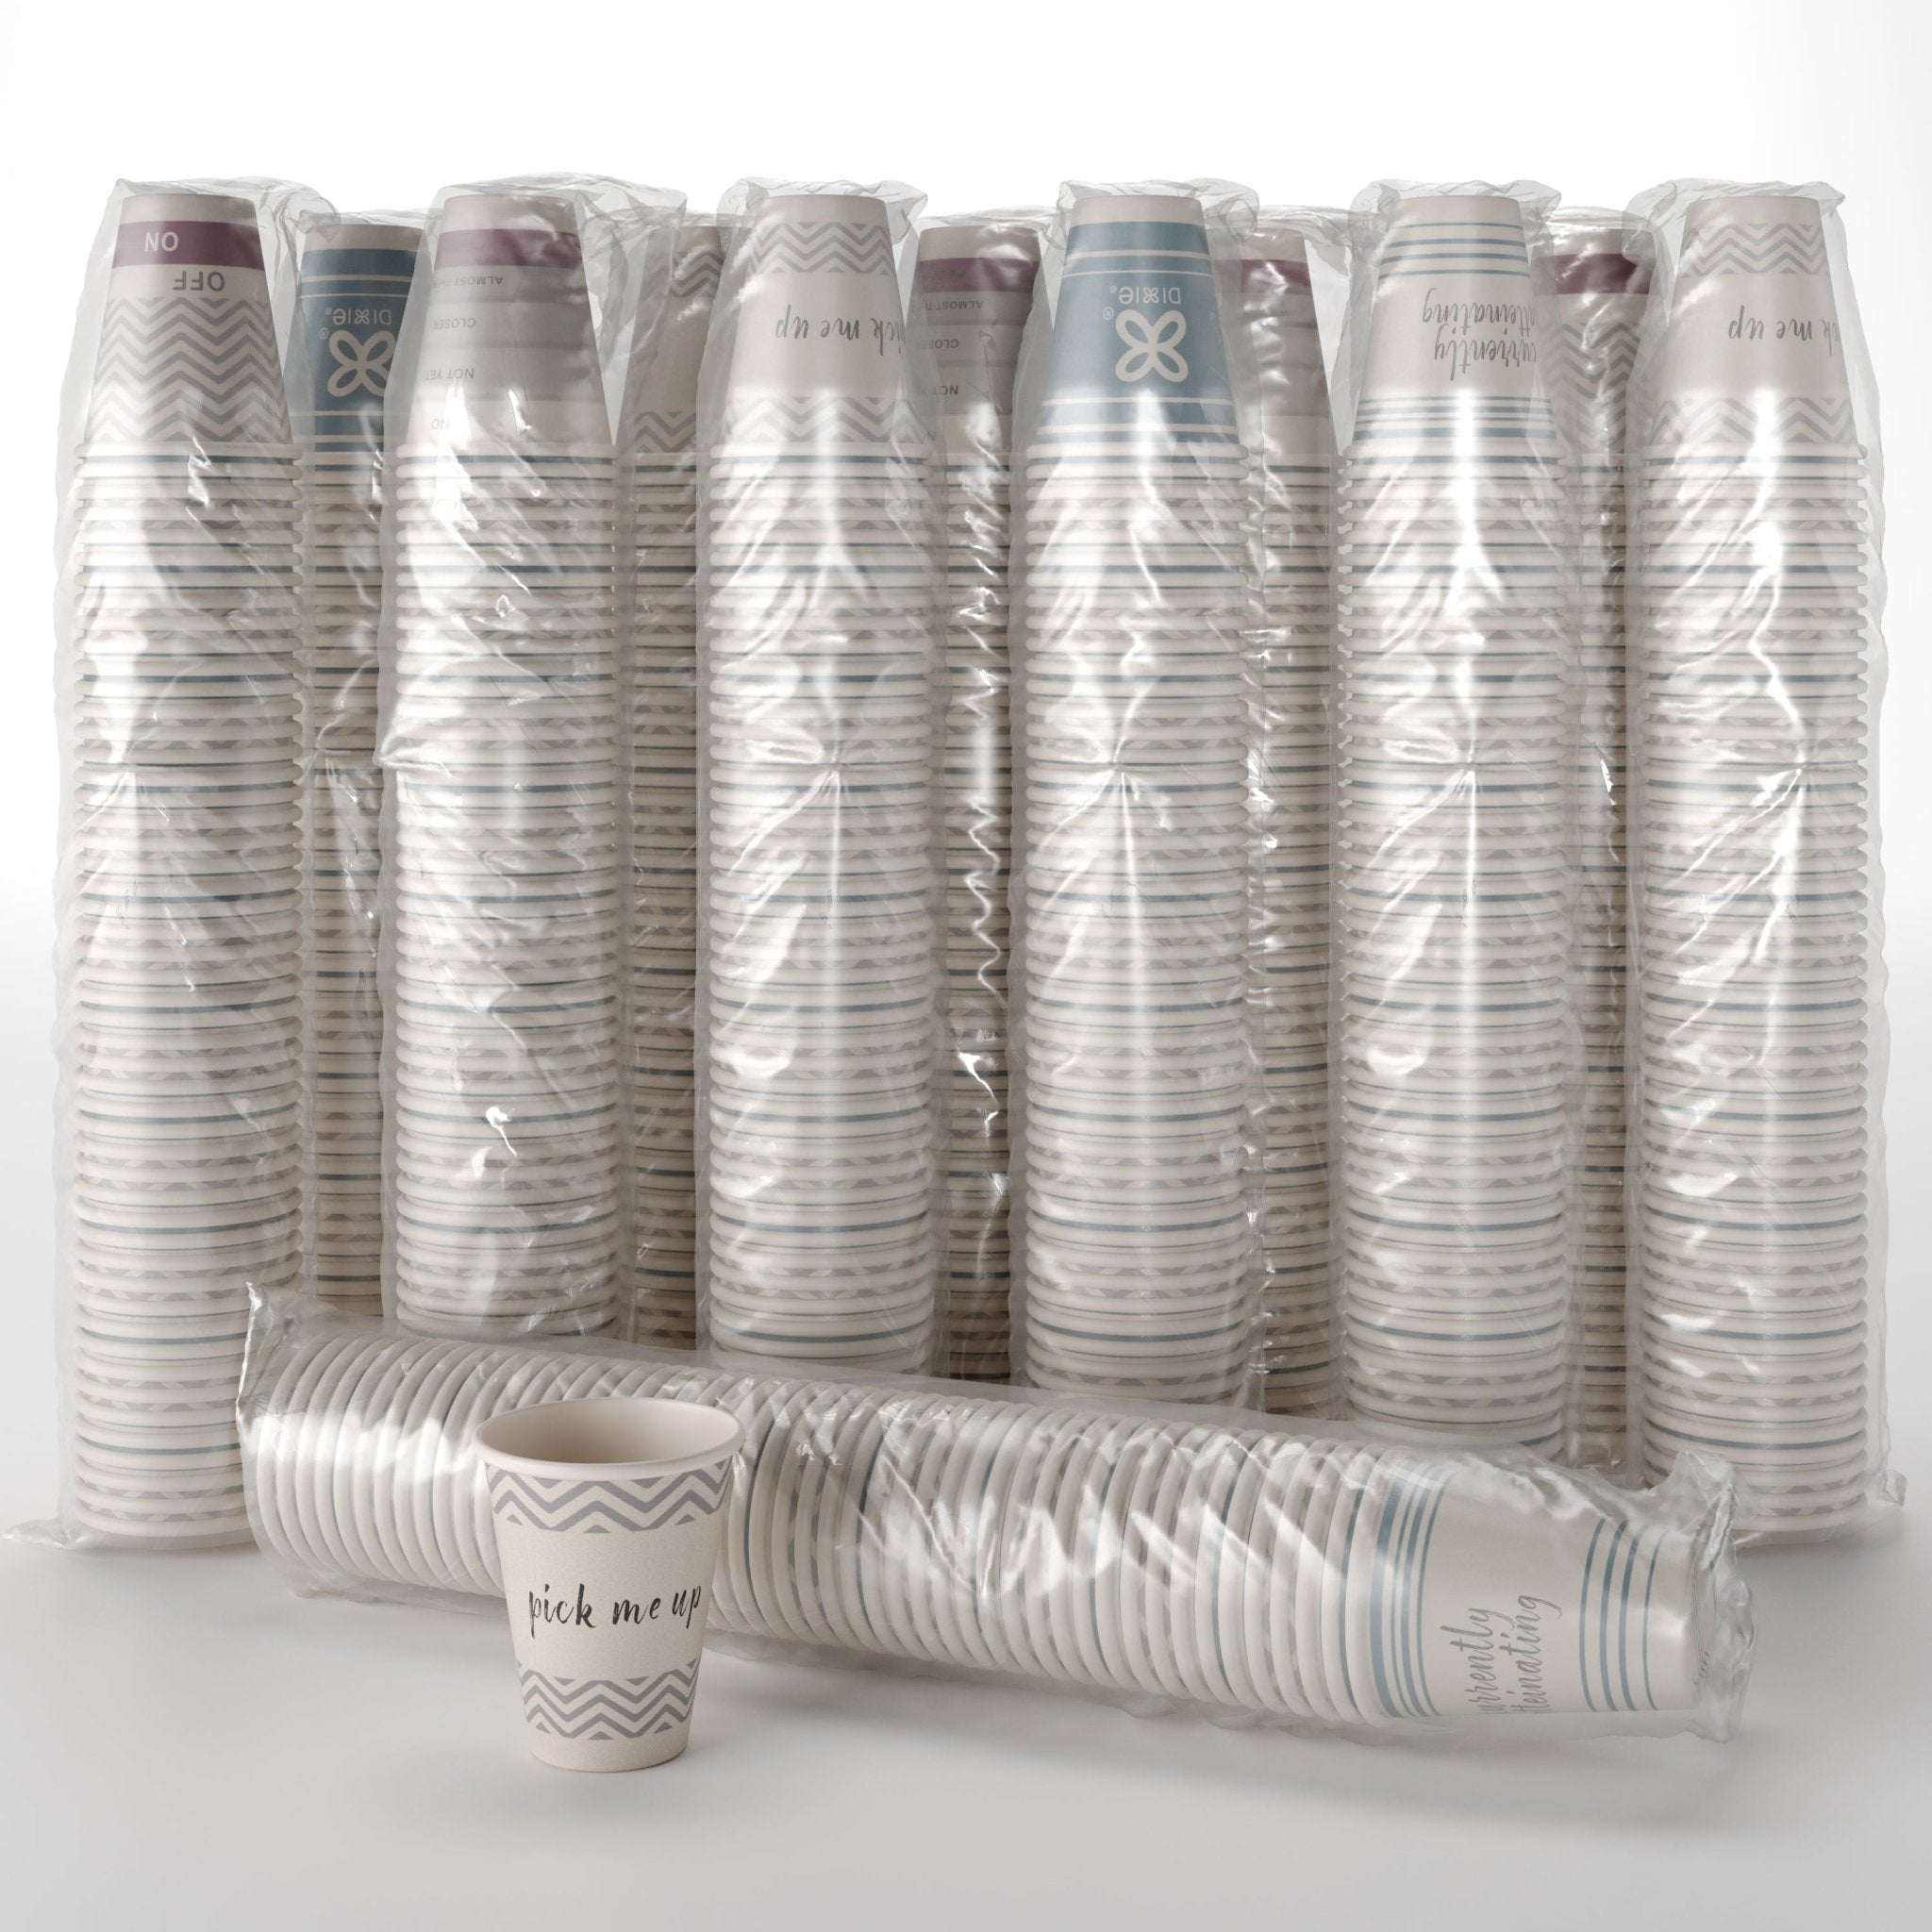 12 Oz. Dixie To Go Paper Cups | 1000 Count